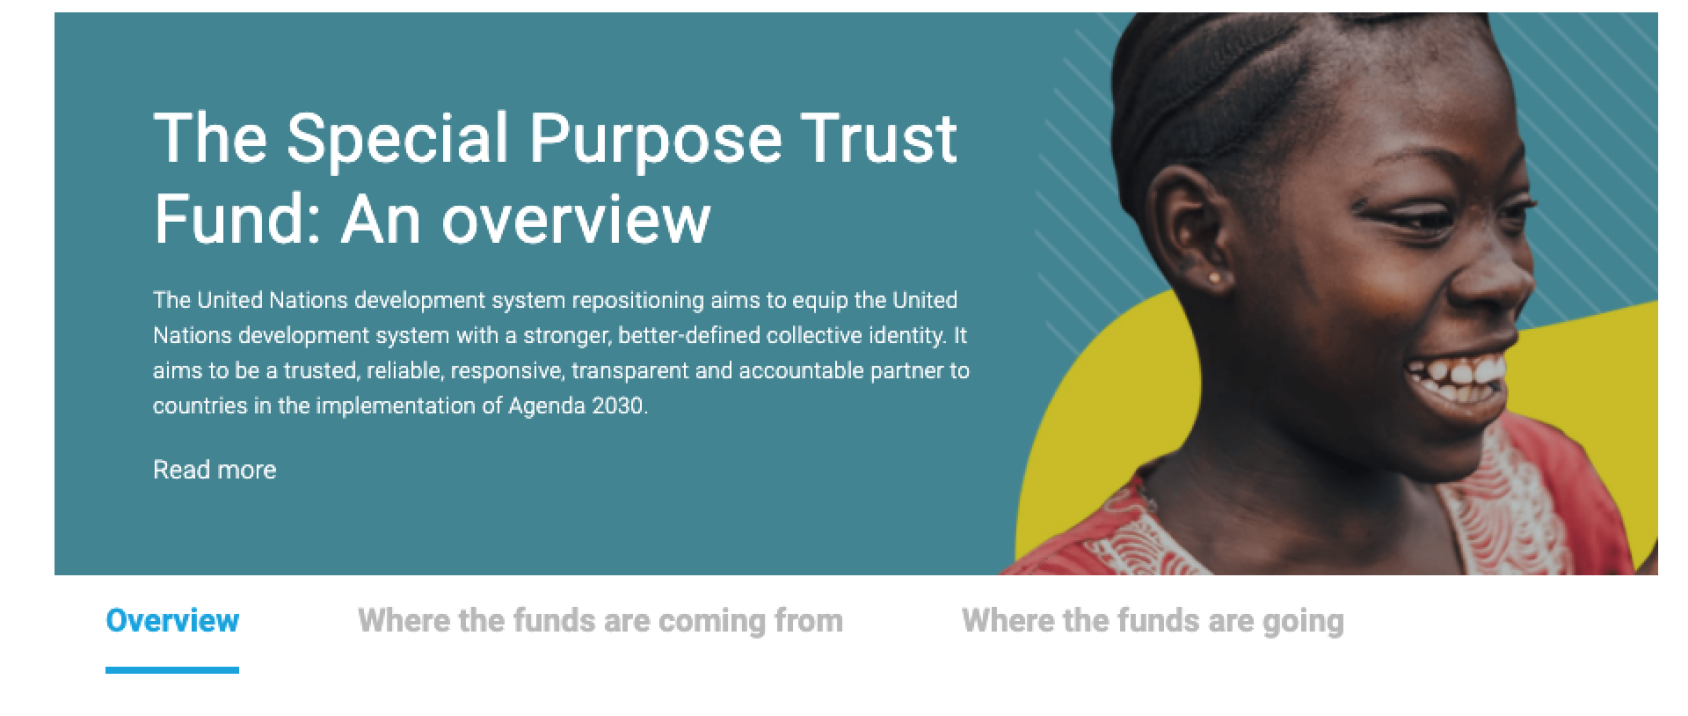 Screenshot from the Special Purpose Trust Fund page. The image shows a girl smiling happily with a text to the left of her image.